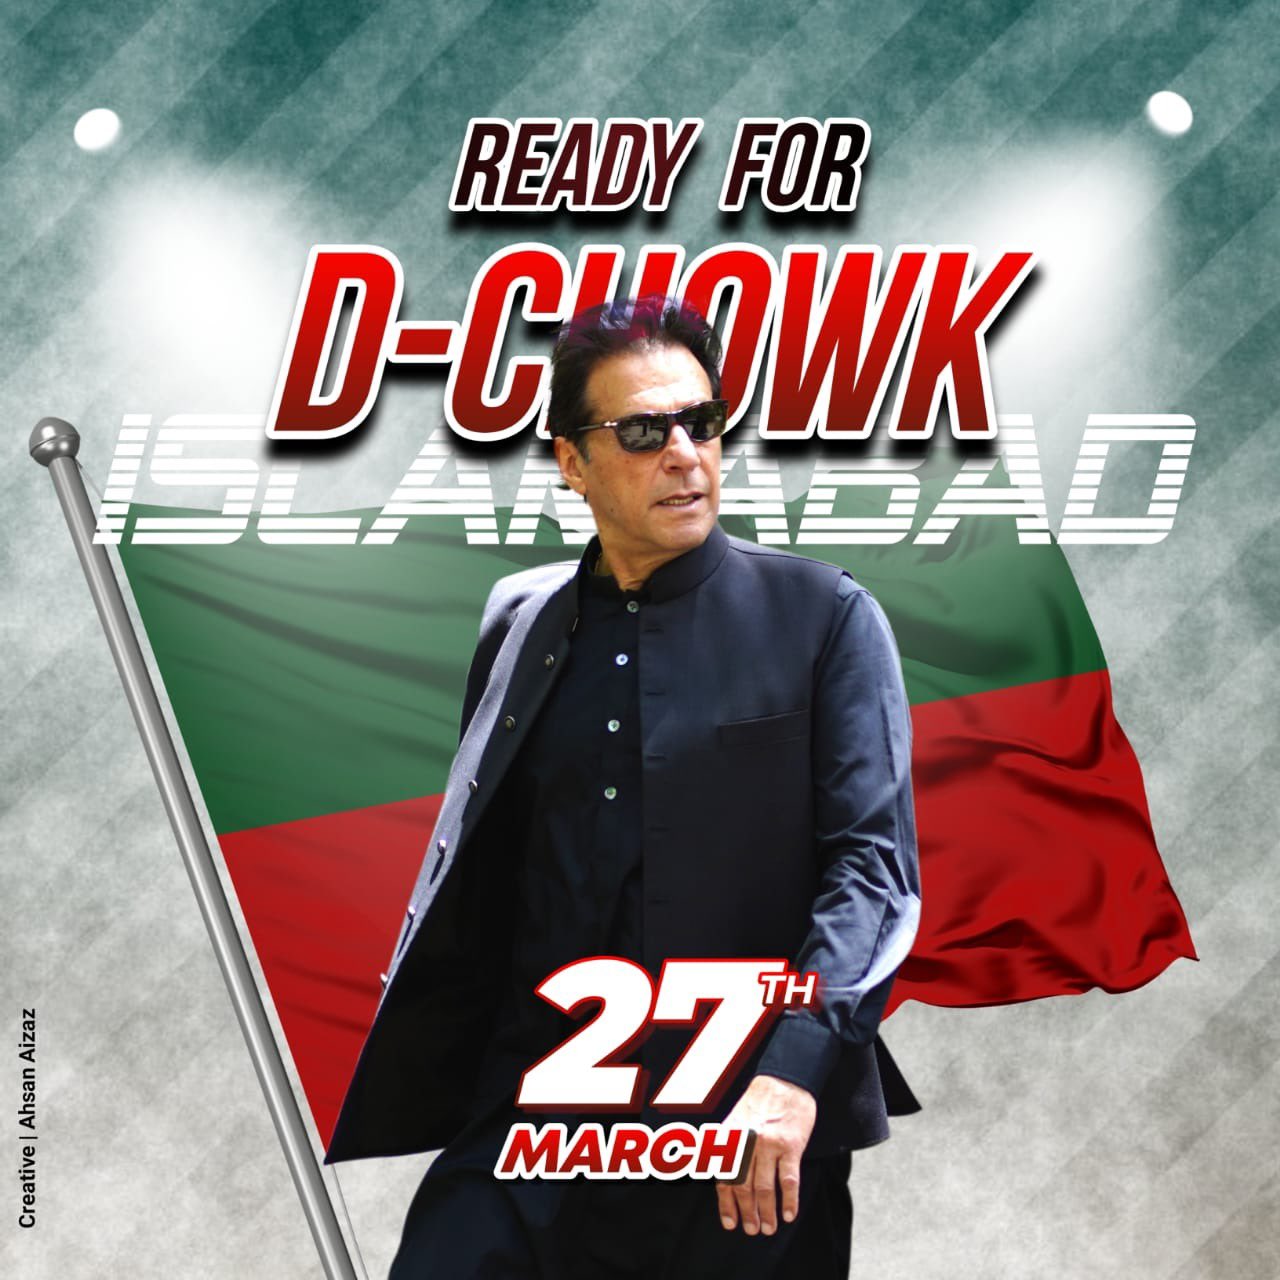 PTI has blazoned to hold a rally on March 27 at D-Chowk.